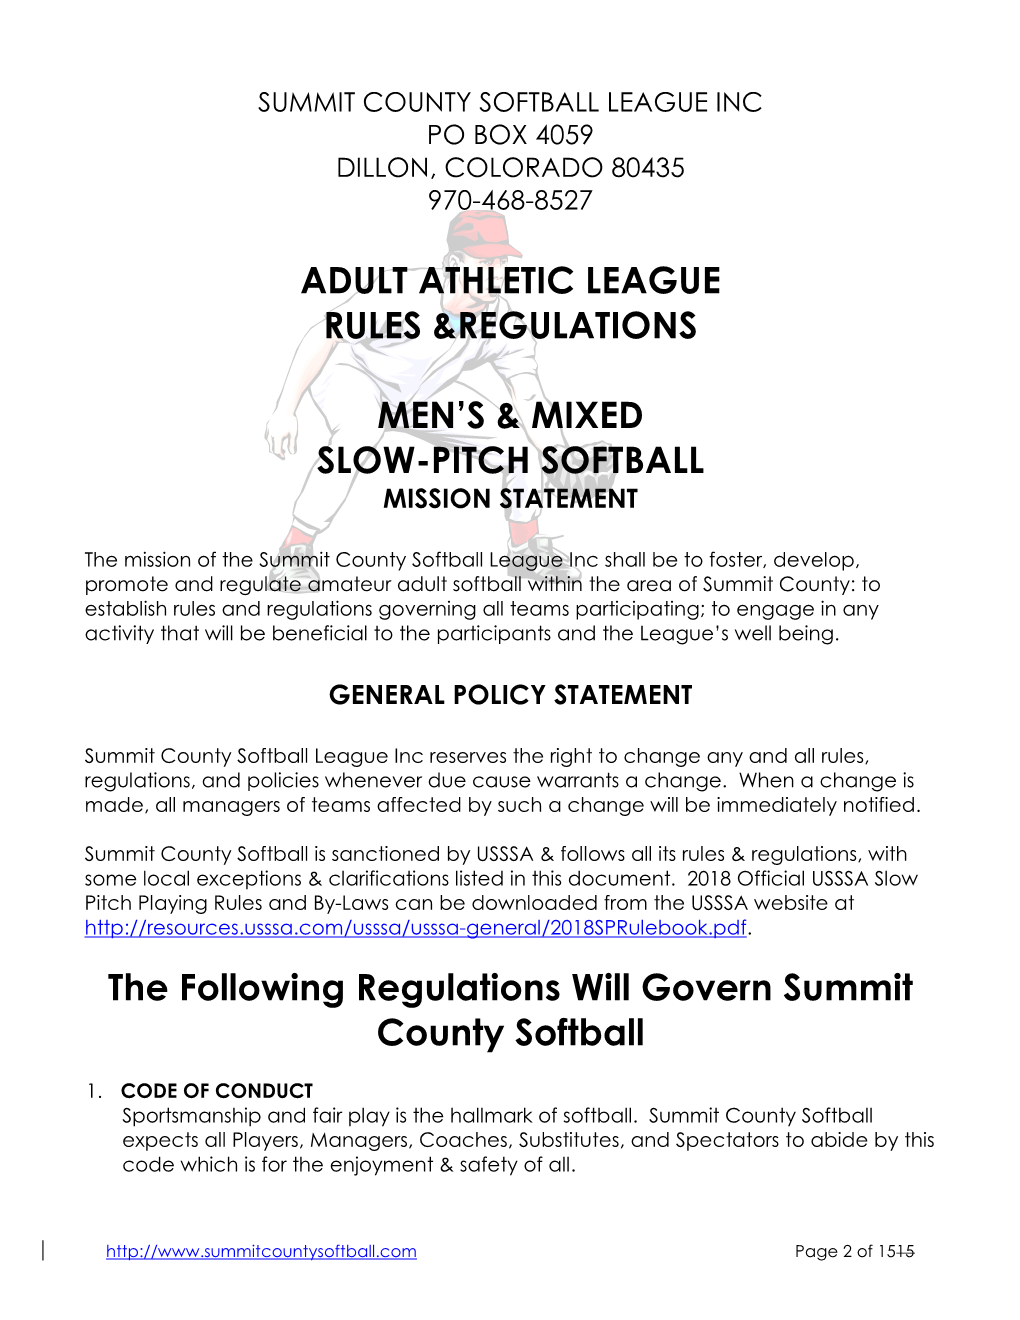 Adult Athletic League Rules &Regulations Men's & Mixed